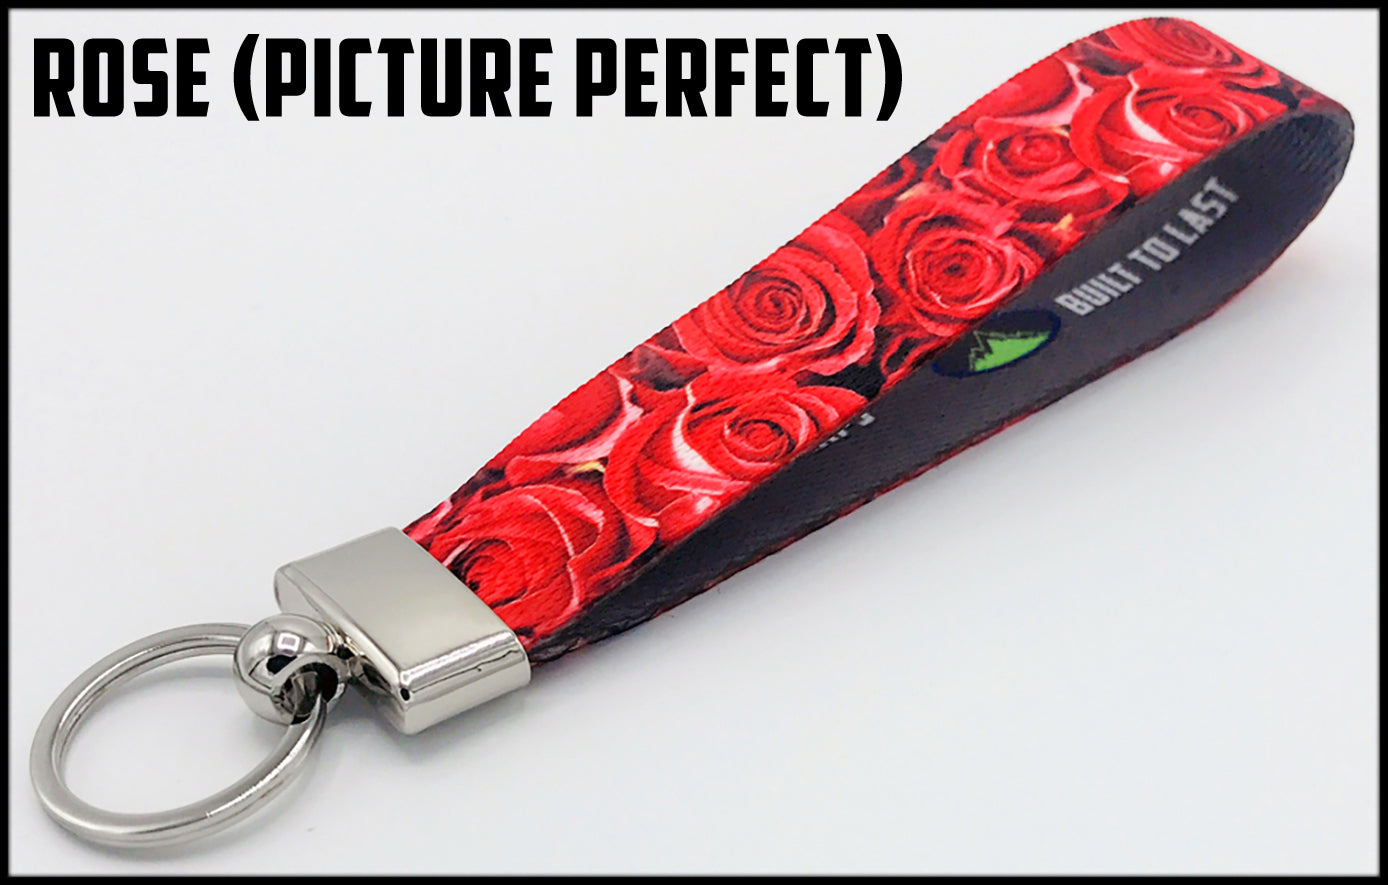 photorealistic red roses. 1 inch custom picture quality polyester webbing keyfob. Design by Northwest Straps.